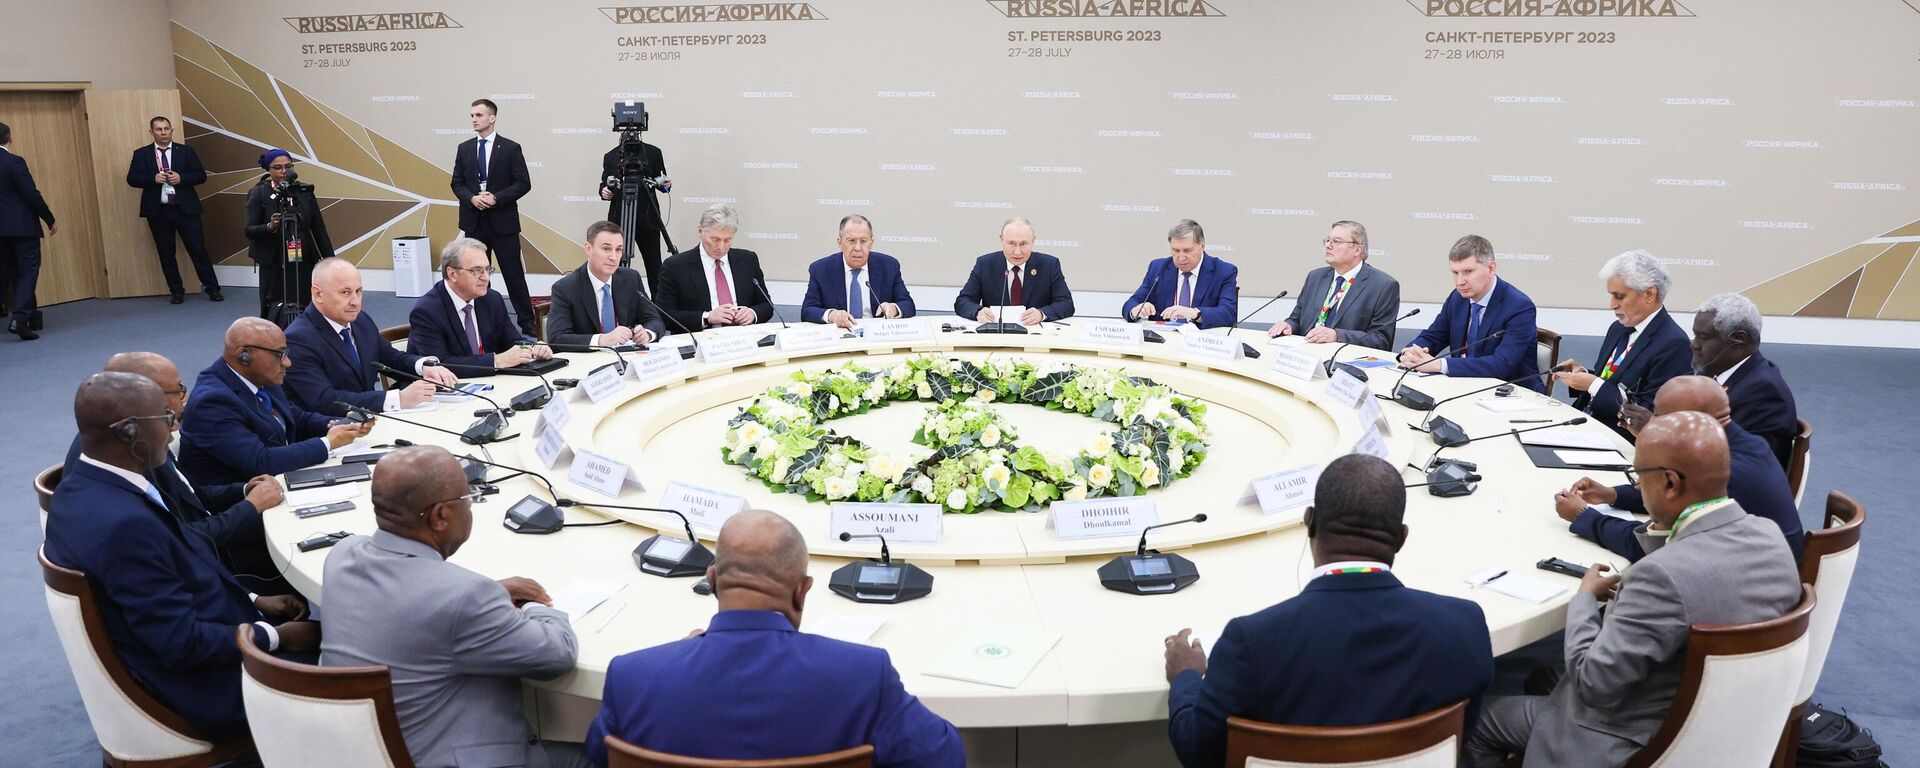 Russian President Vladimir Putin, Chairman of the African Union, President of the Union of the Comoros Azali Assoumani and Chairman of the African Union Commission Moussa Faki Mahamat during a meeting on the sidelines of the second Russia-Africa Summit in St. Petersburg on July 27, 2023. - Sputnik Africa, 1920, 27.07.2023